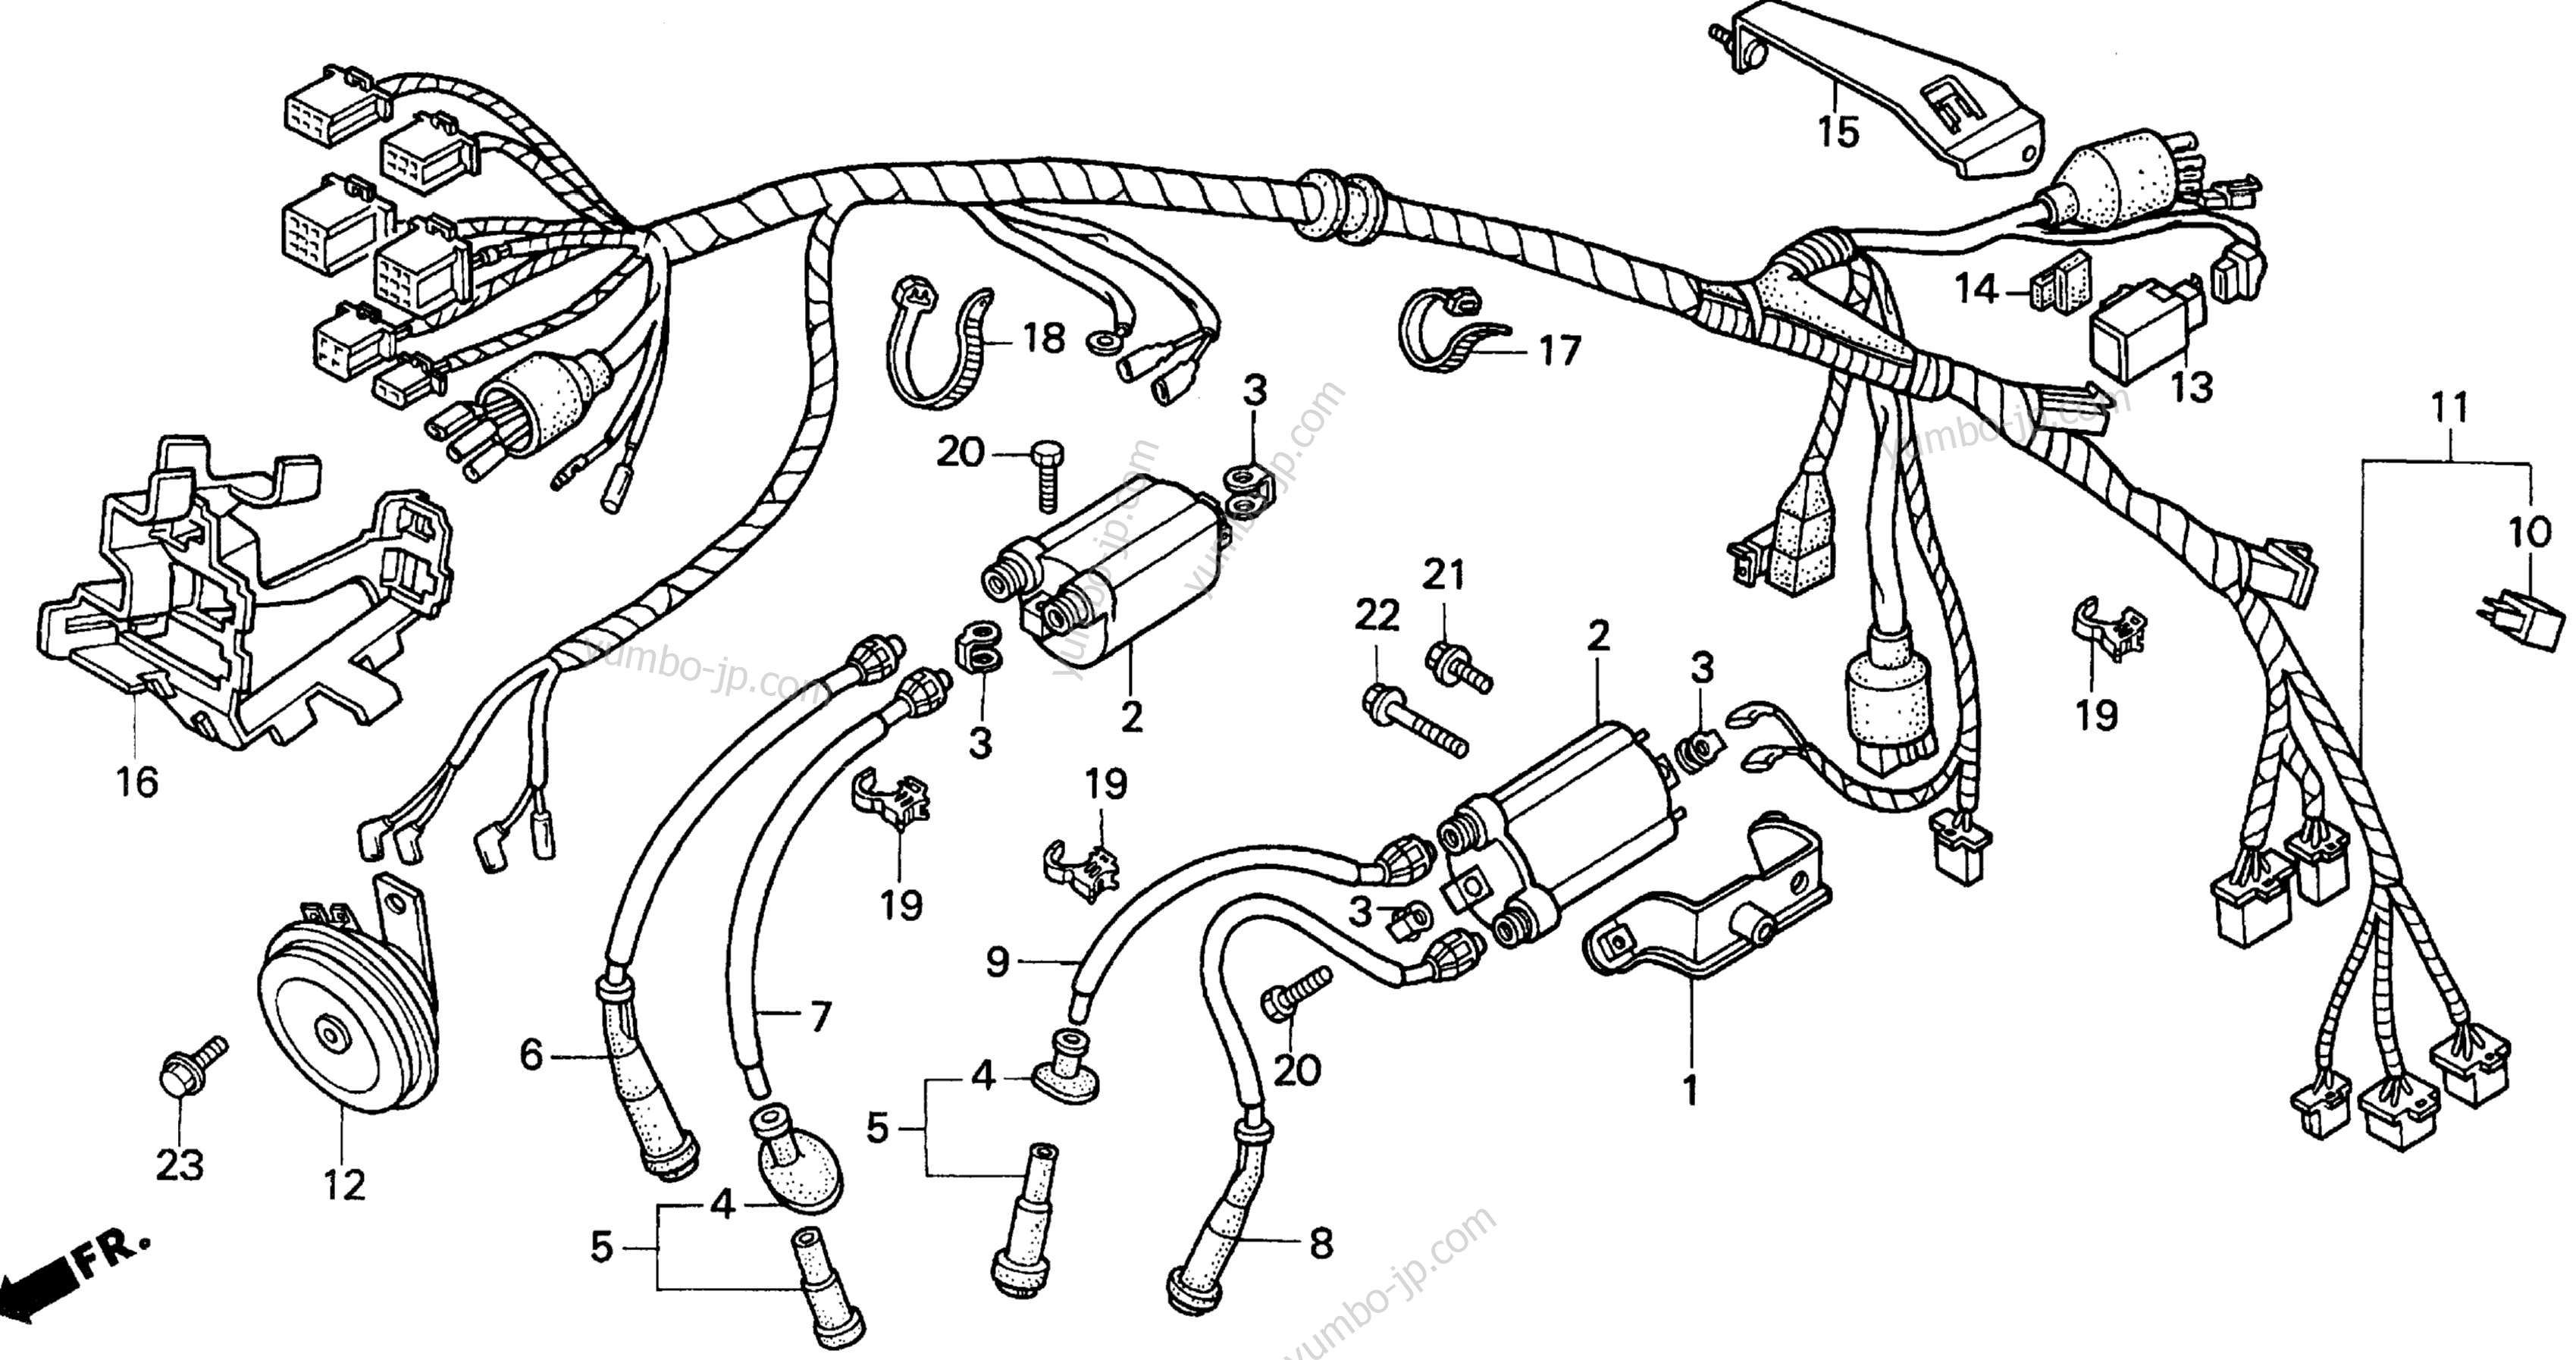 WIRE HARNESS for motorcycles HONDA VT600C AC 2000 year